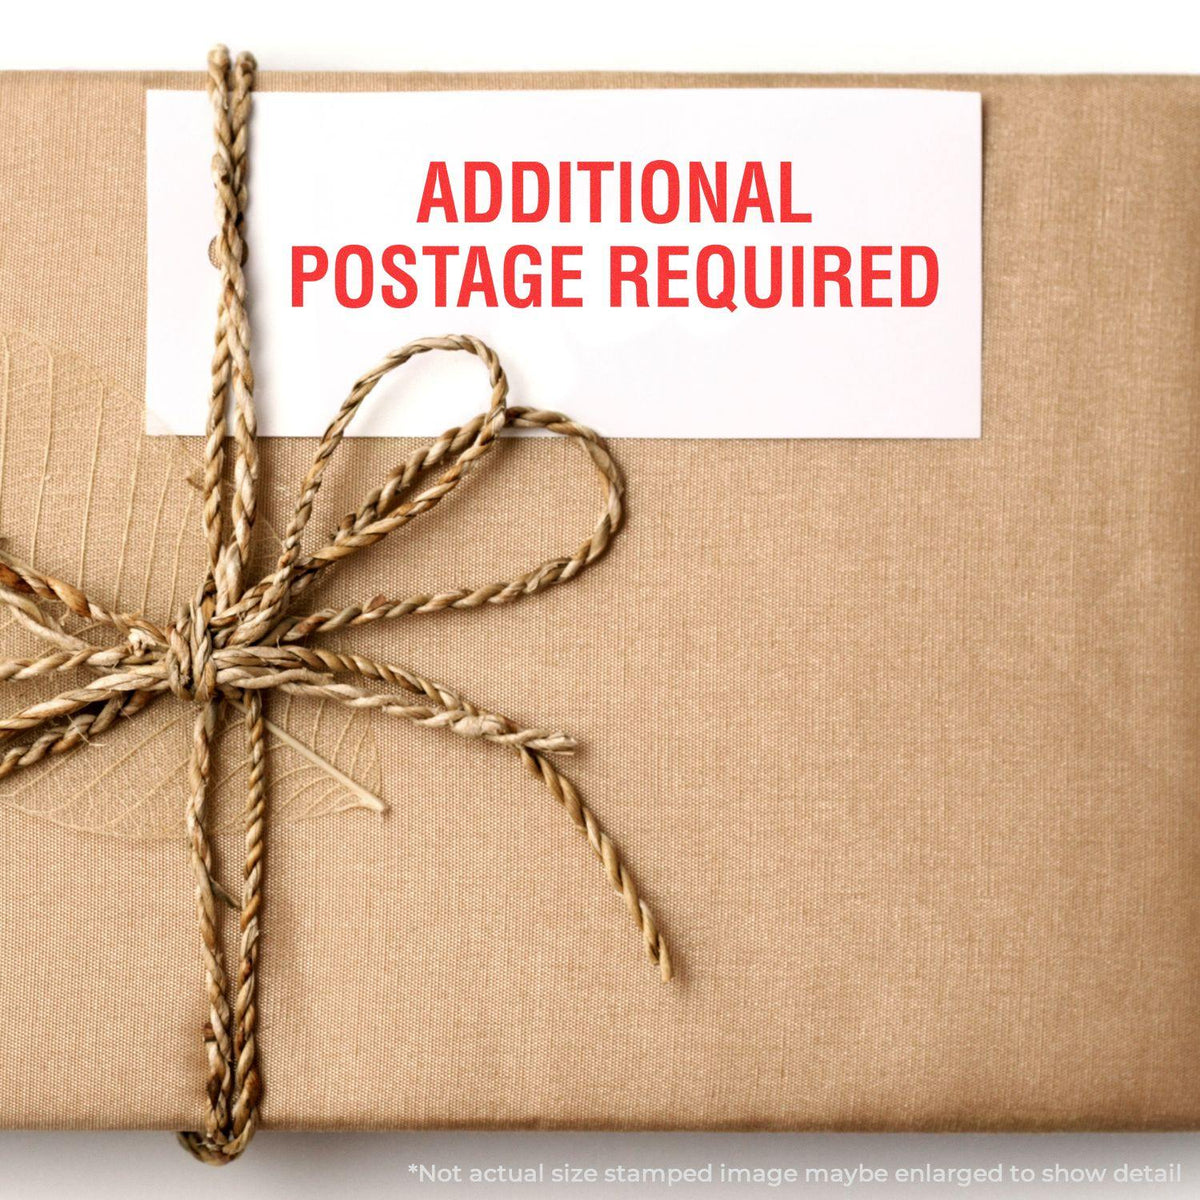 In Use Additional Postage Required Rubber Stamp Image